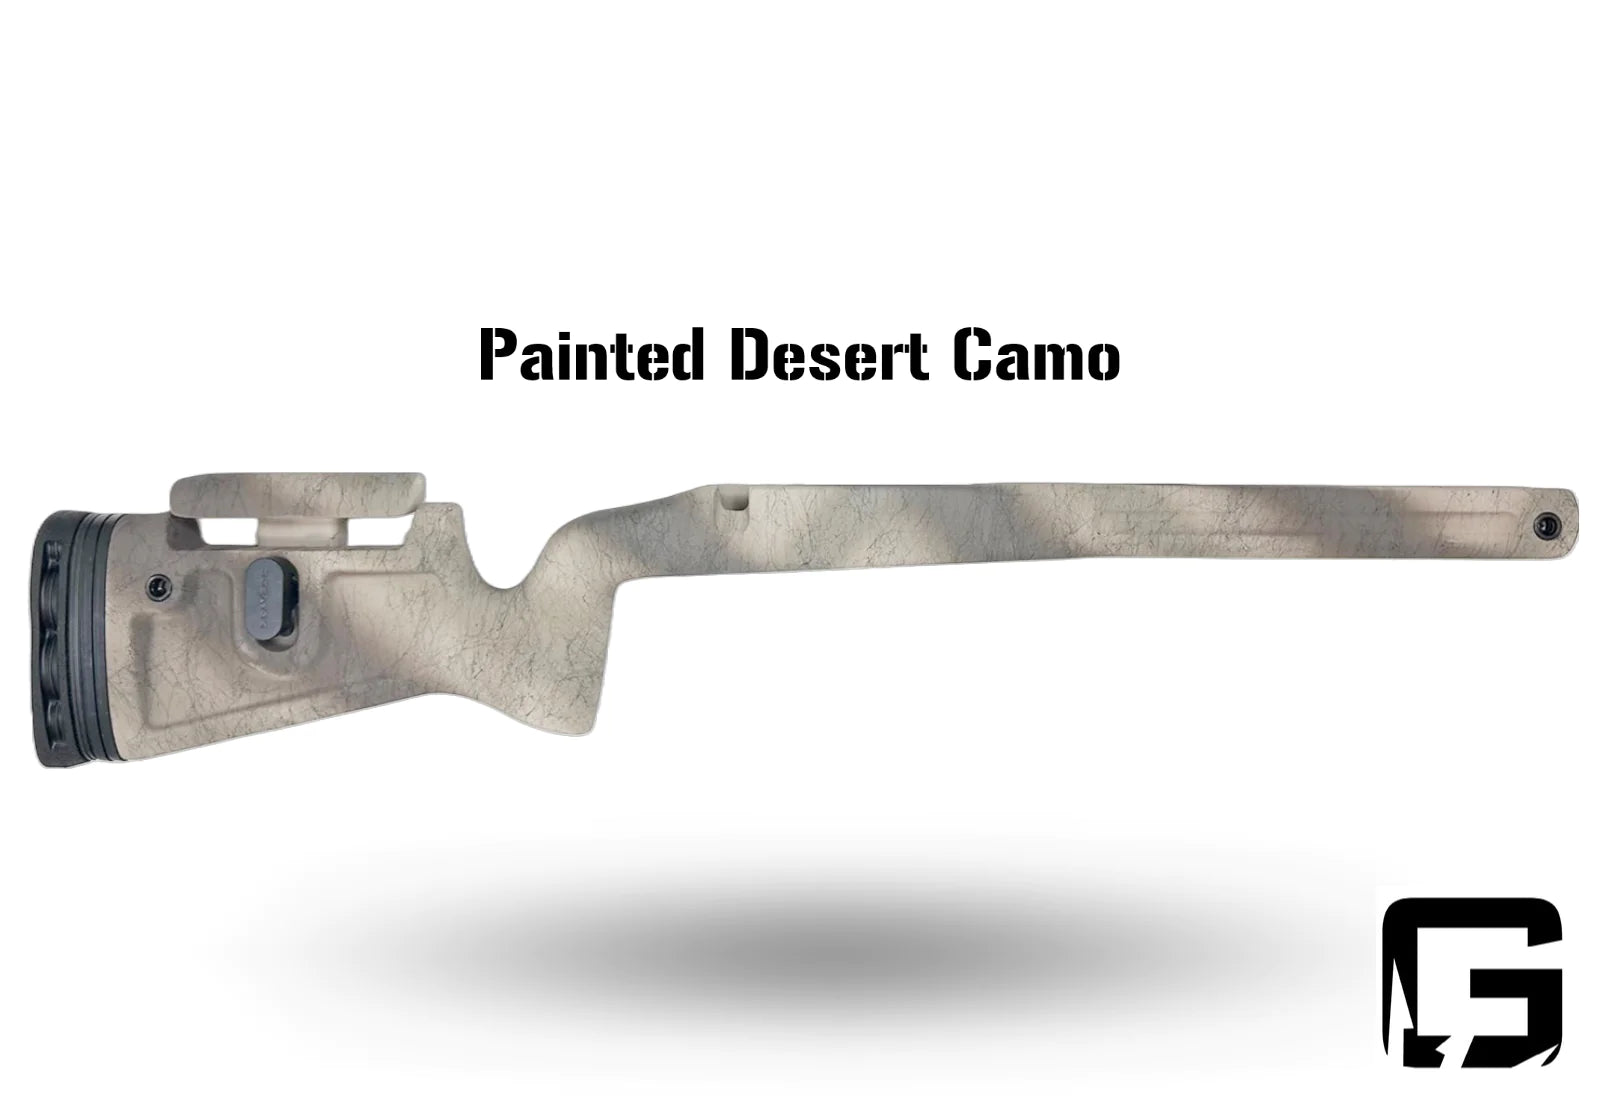 Phoenix 2 - Right Hand Long Action Savage 110, Factory Savage DBM w/ AICS Mags, Fits any barrel.  Painted Desert Camo